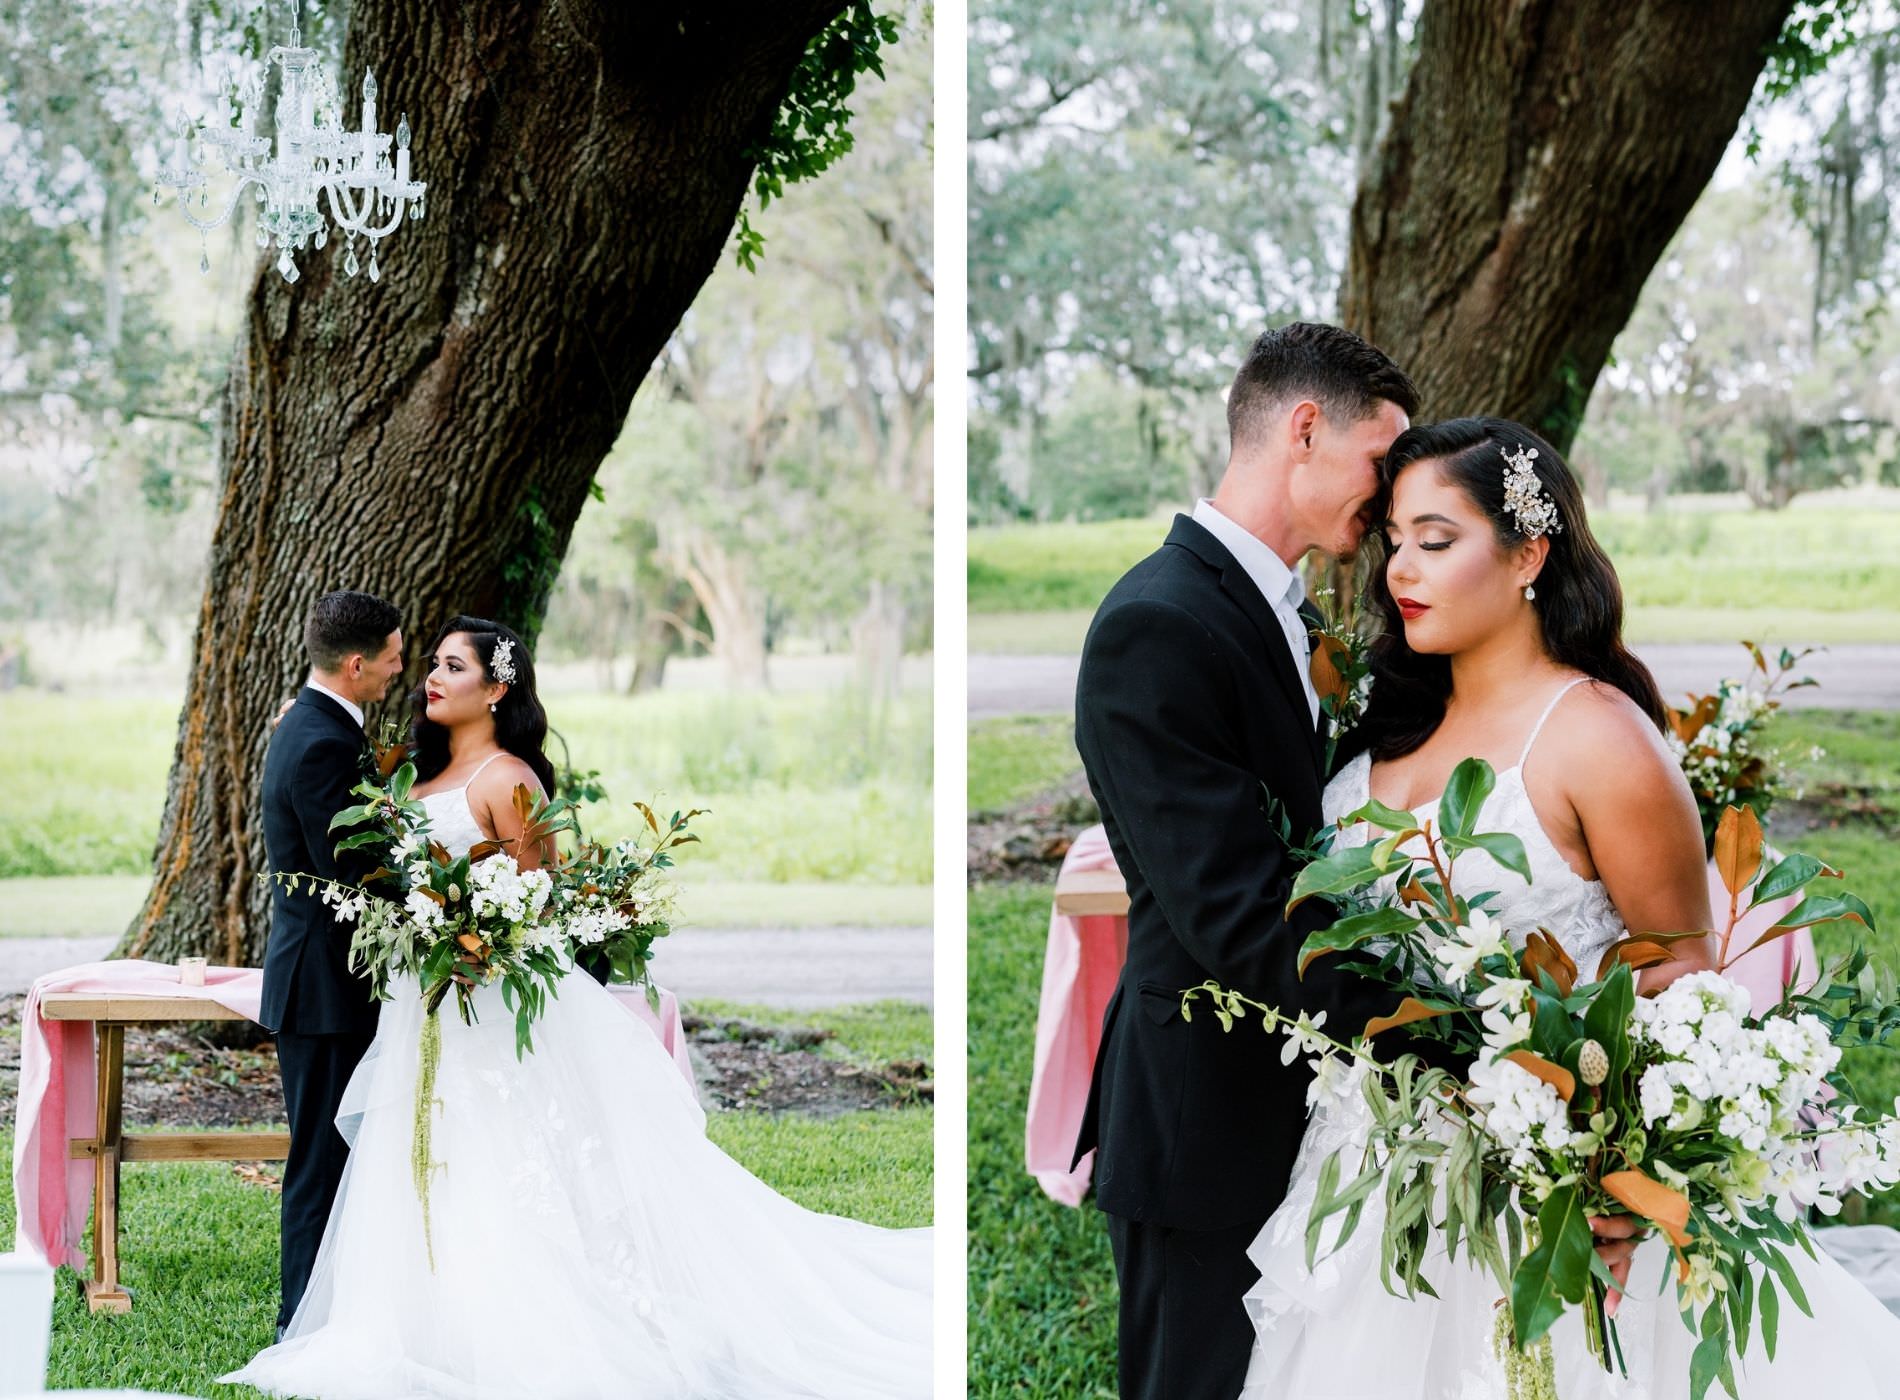 Vintage Inspired Outdoor Florida Wedding Ceremony with Bride and Groom at Two Sisters Ranch in Dade City, Bride holding Extravagant Magnolia Leaf Bouquet with White Florals, Wearing Hollywood Style Glam Hairstyle | Tampa Bay Luxury Wedding Planner EventFull Weddings